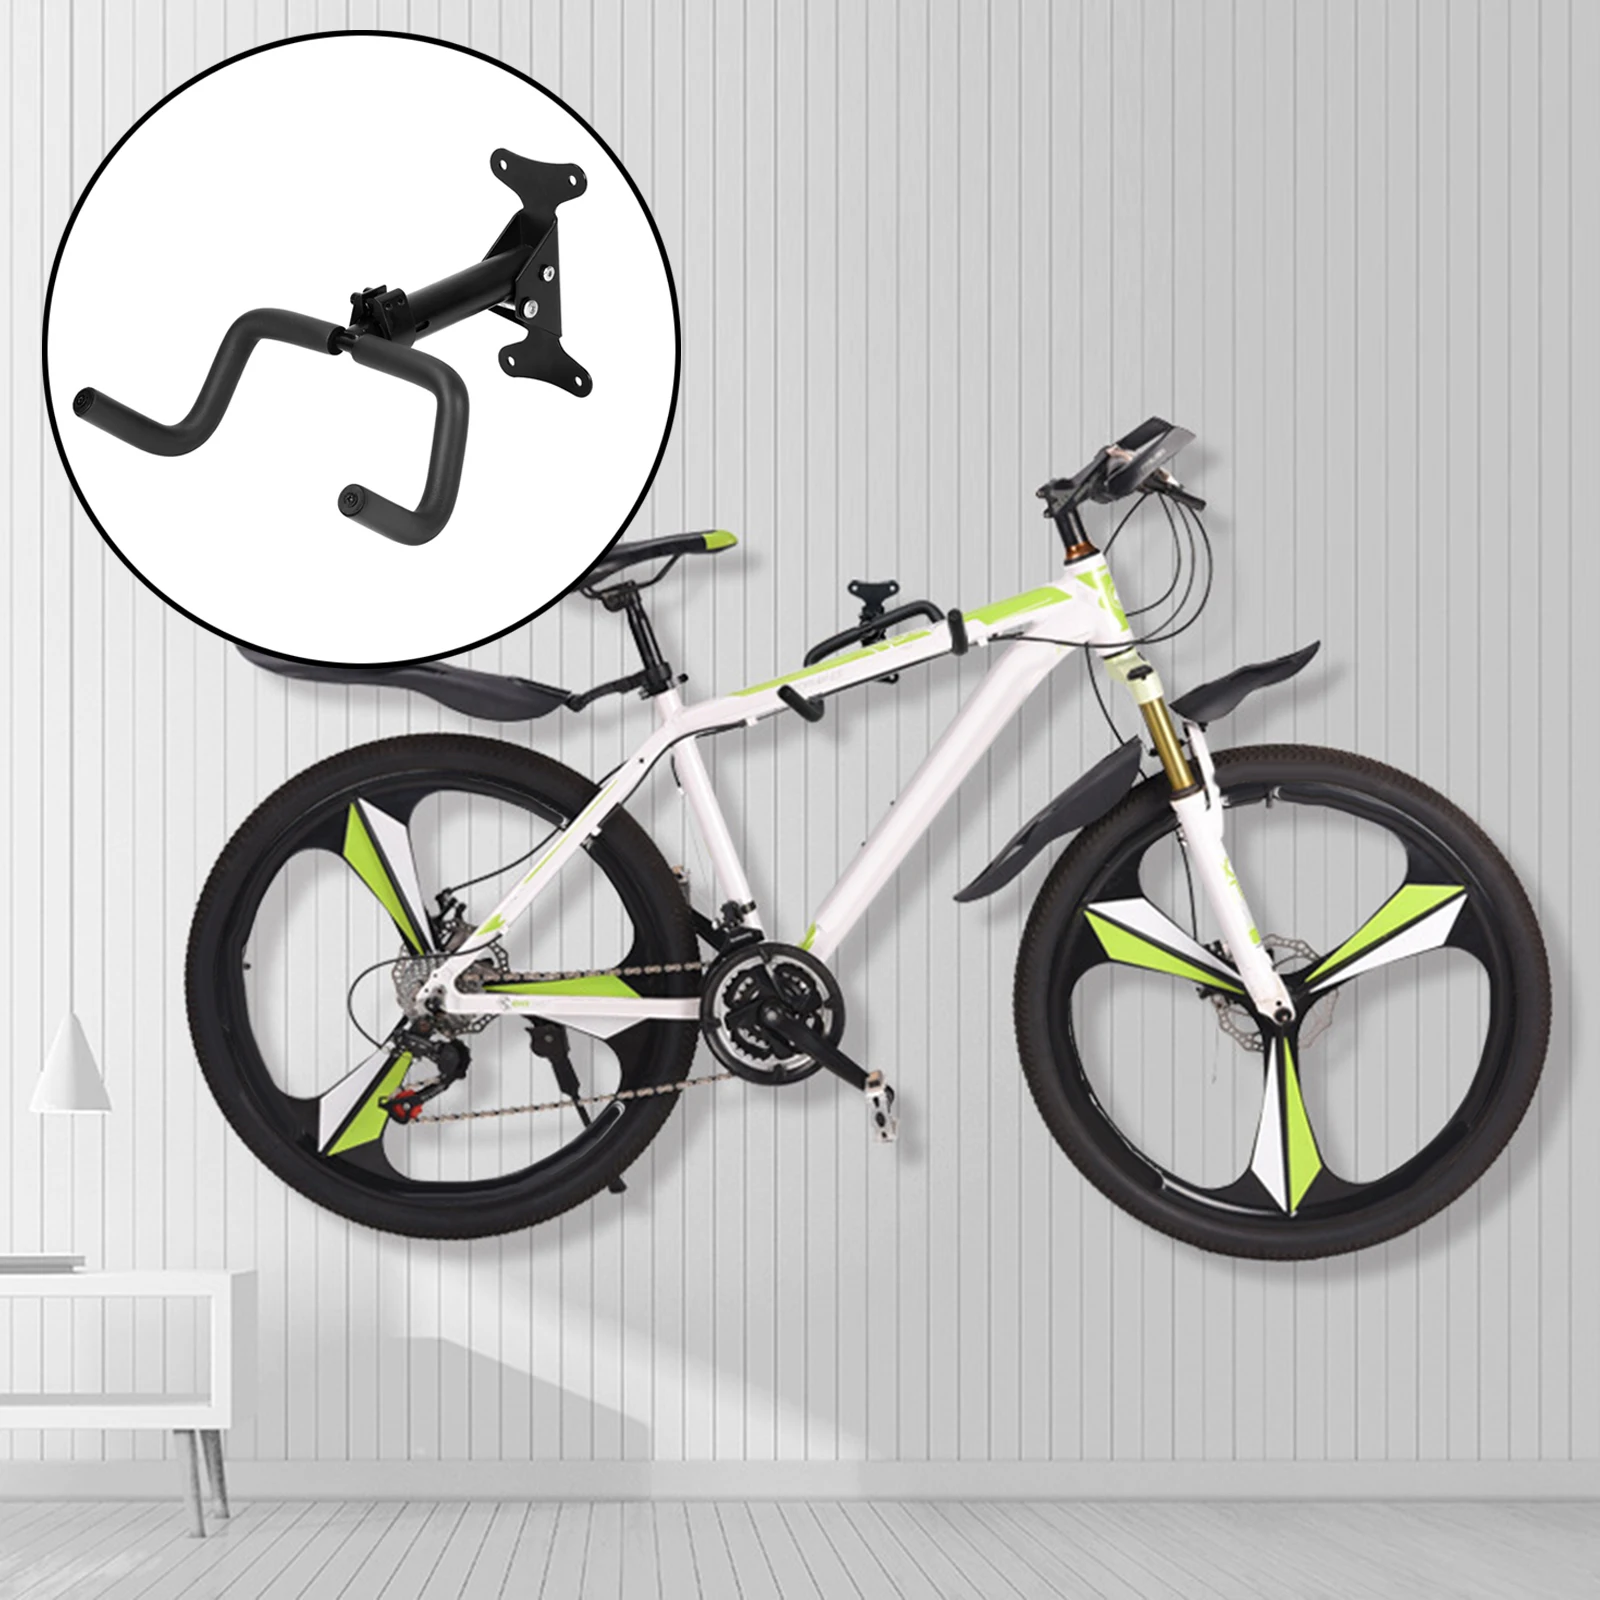 1PCS Bicycle Wall Stand Holder Foldable MTB Road Bike Storage Hanging Hanger Hook Cycling Display Rack Support Stand Bracket